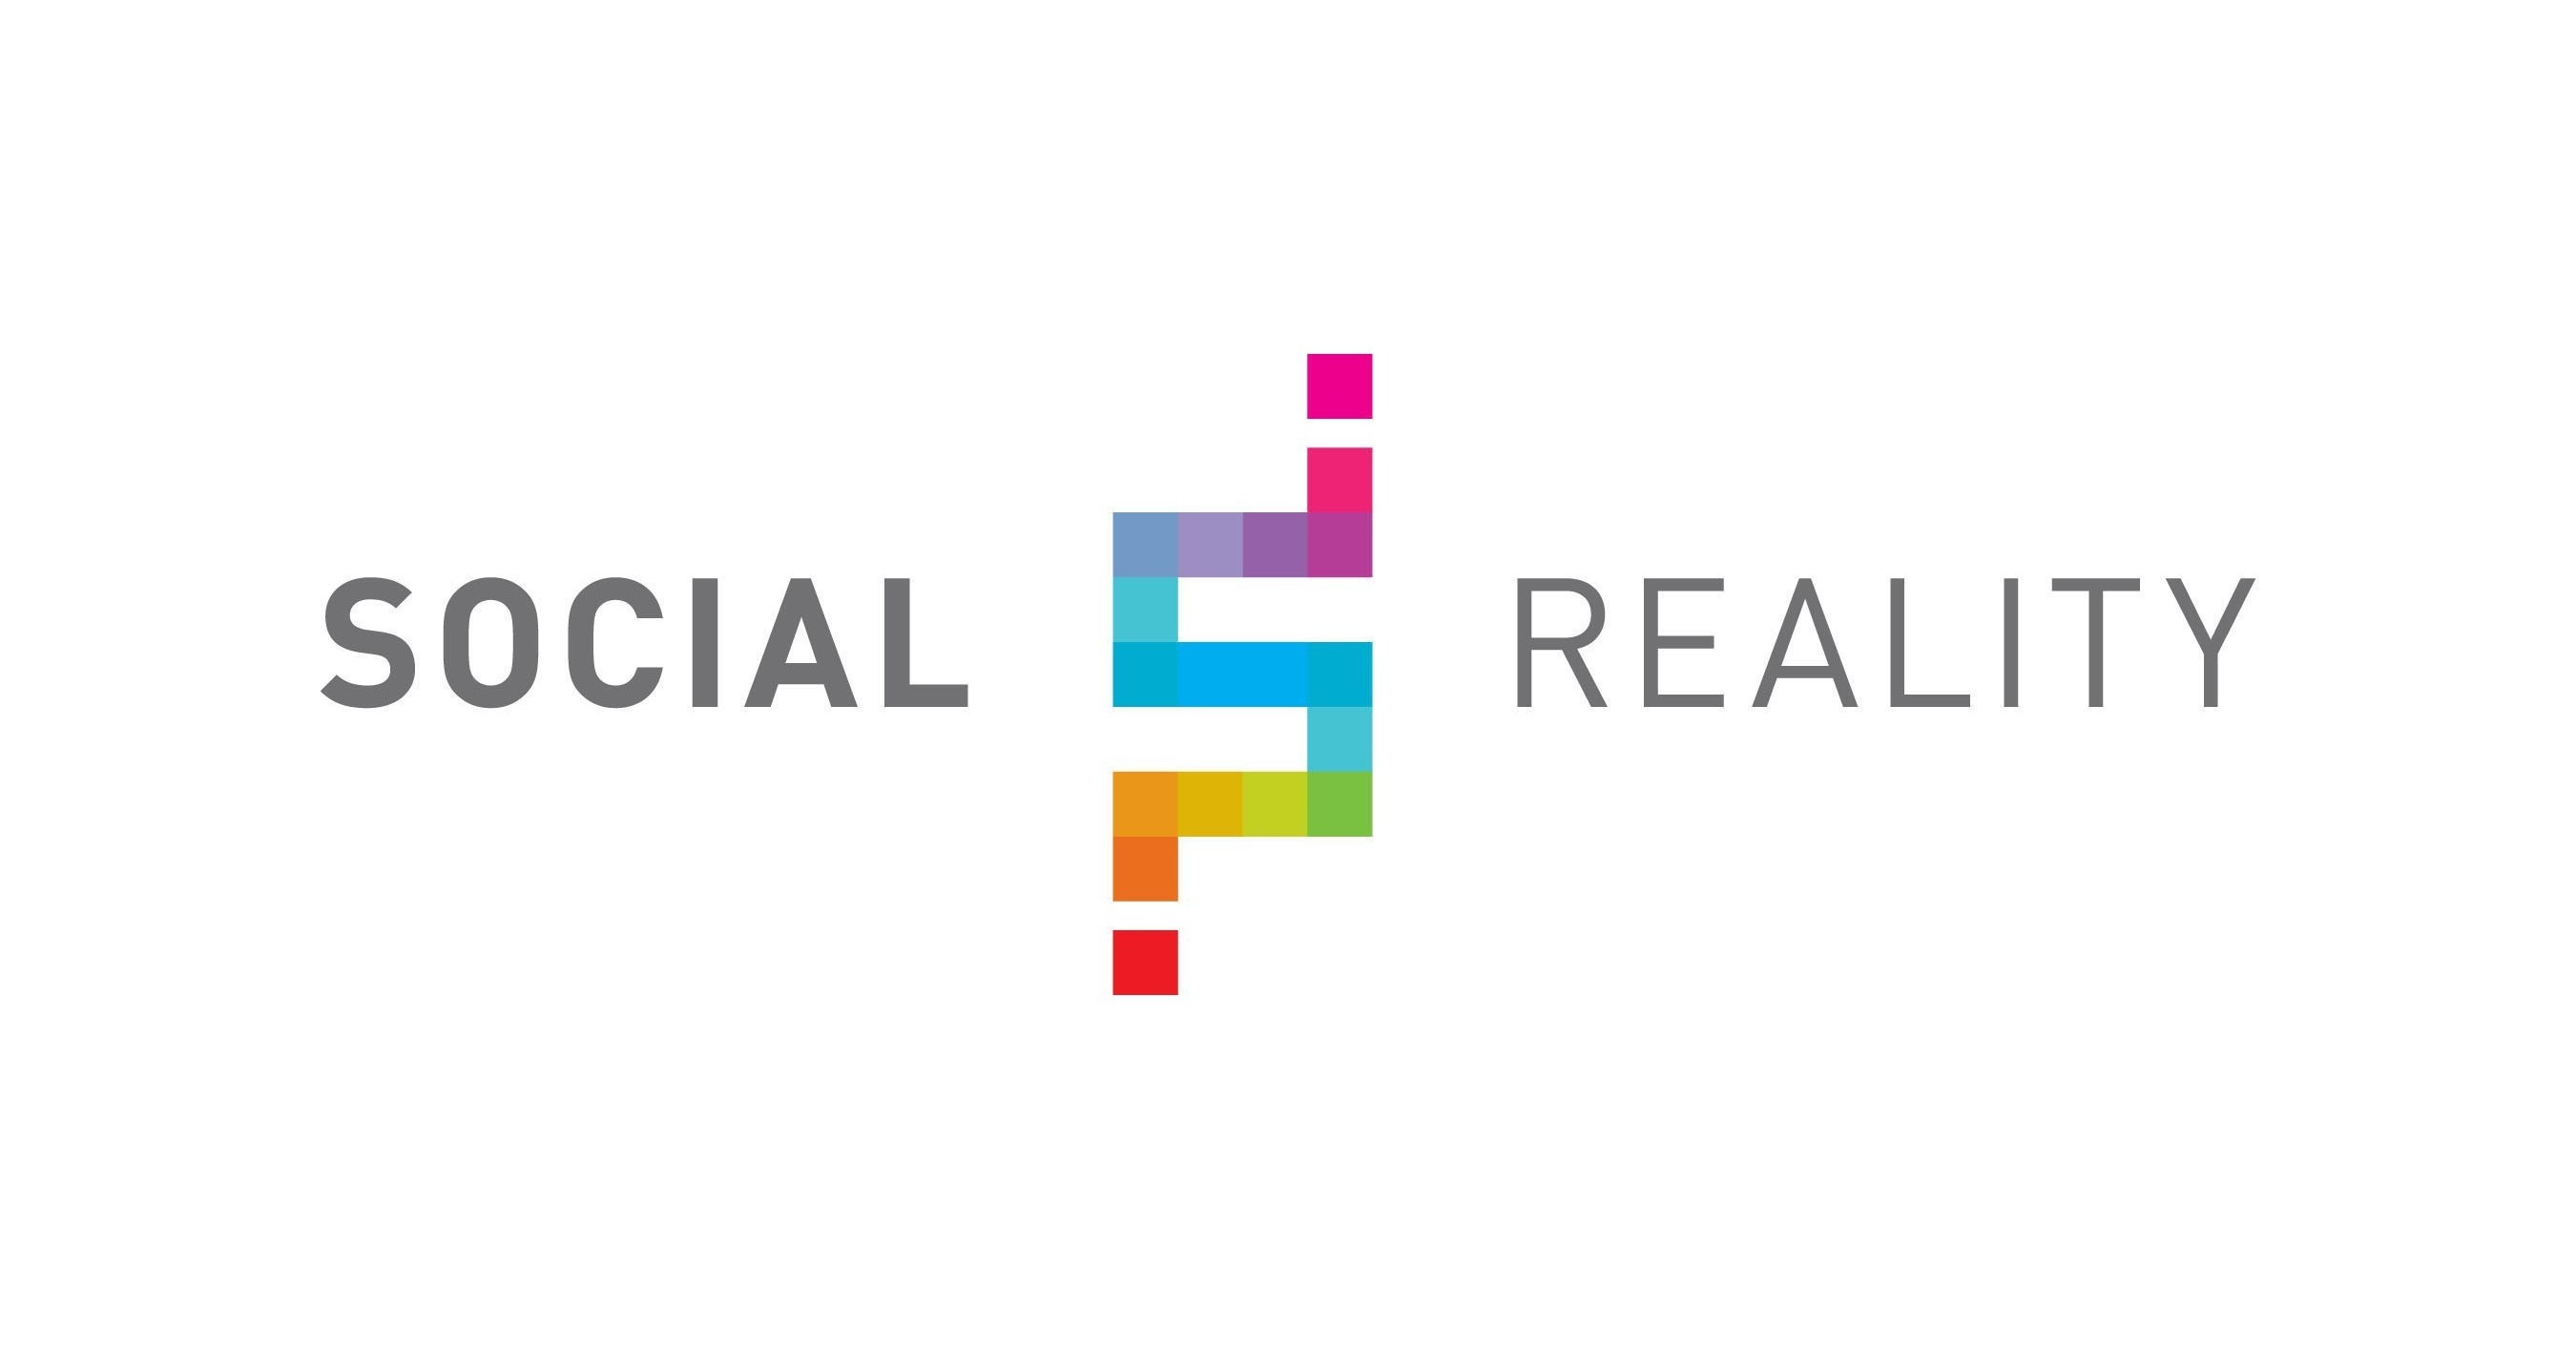 Social Reality Announces Offering for $4 Million